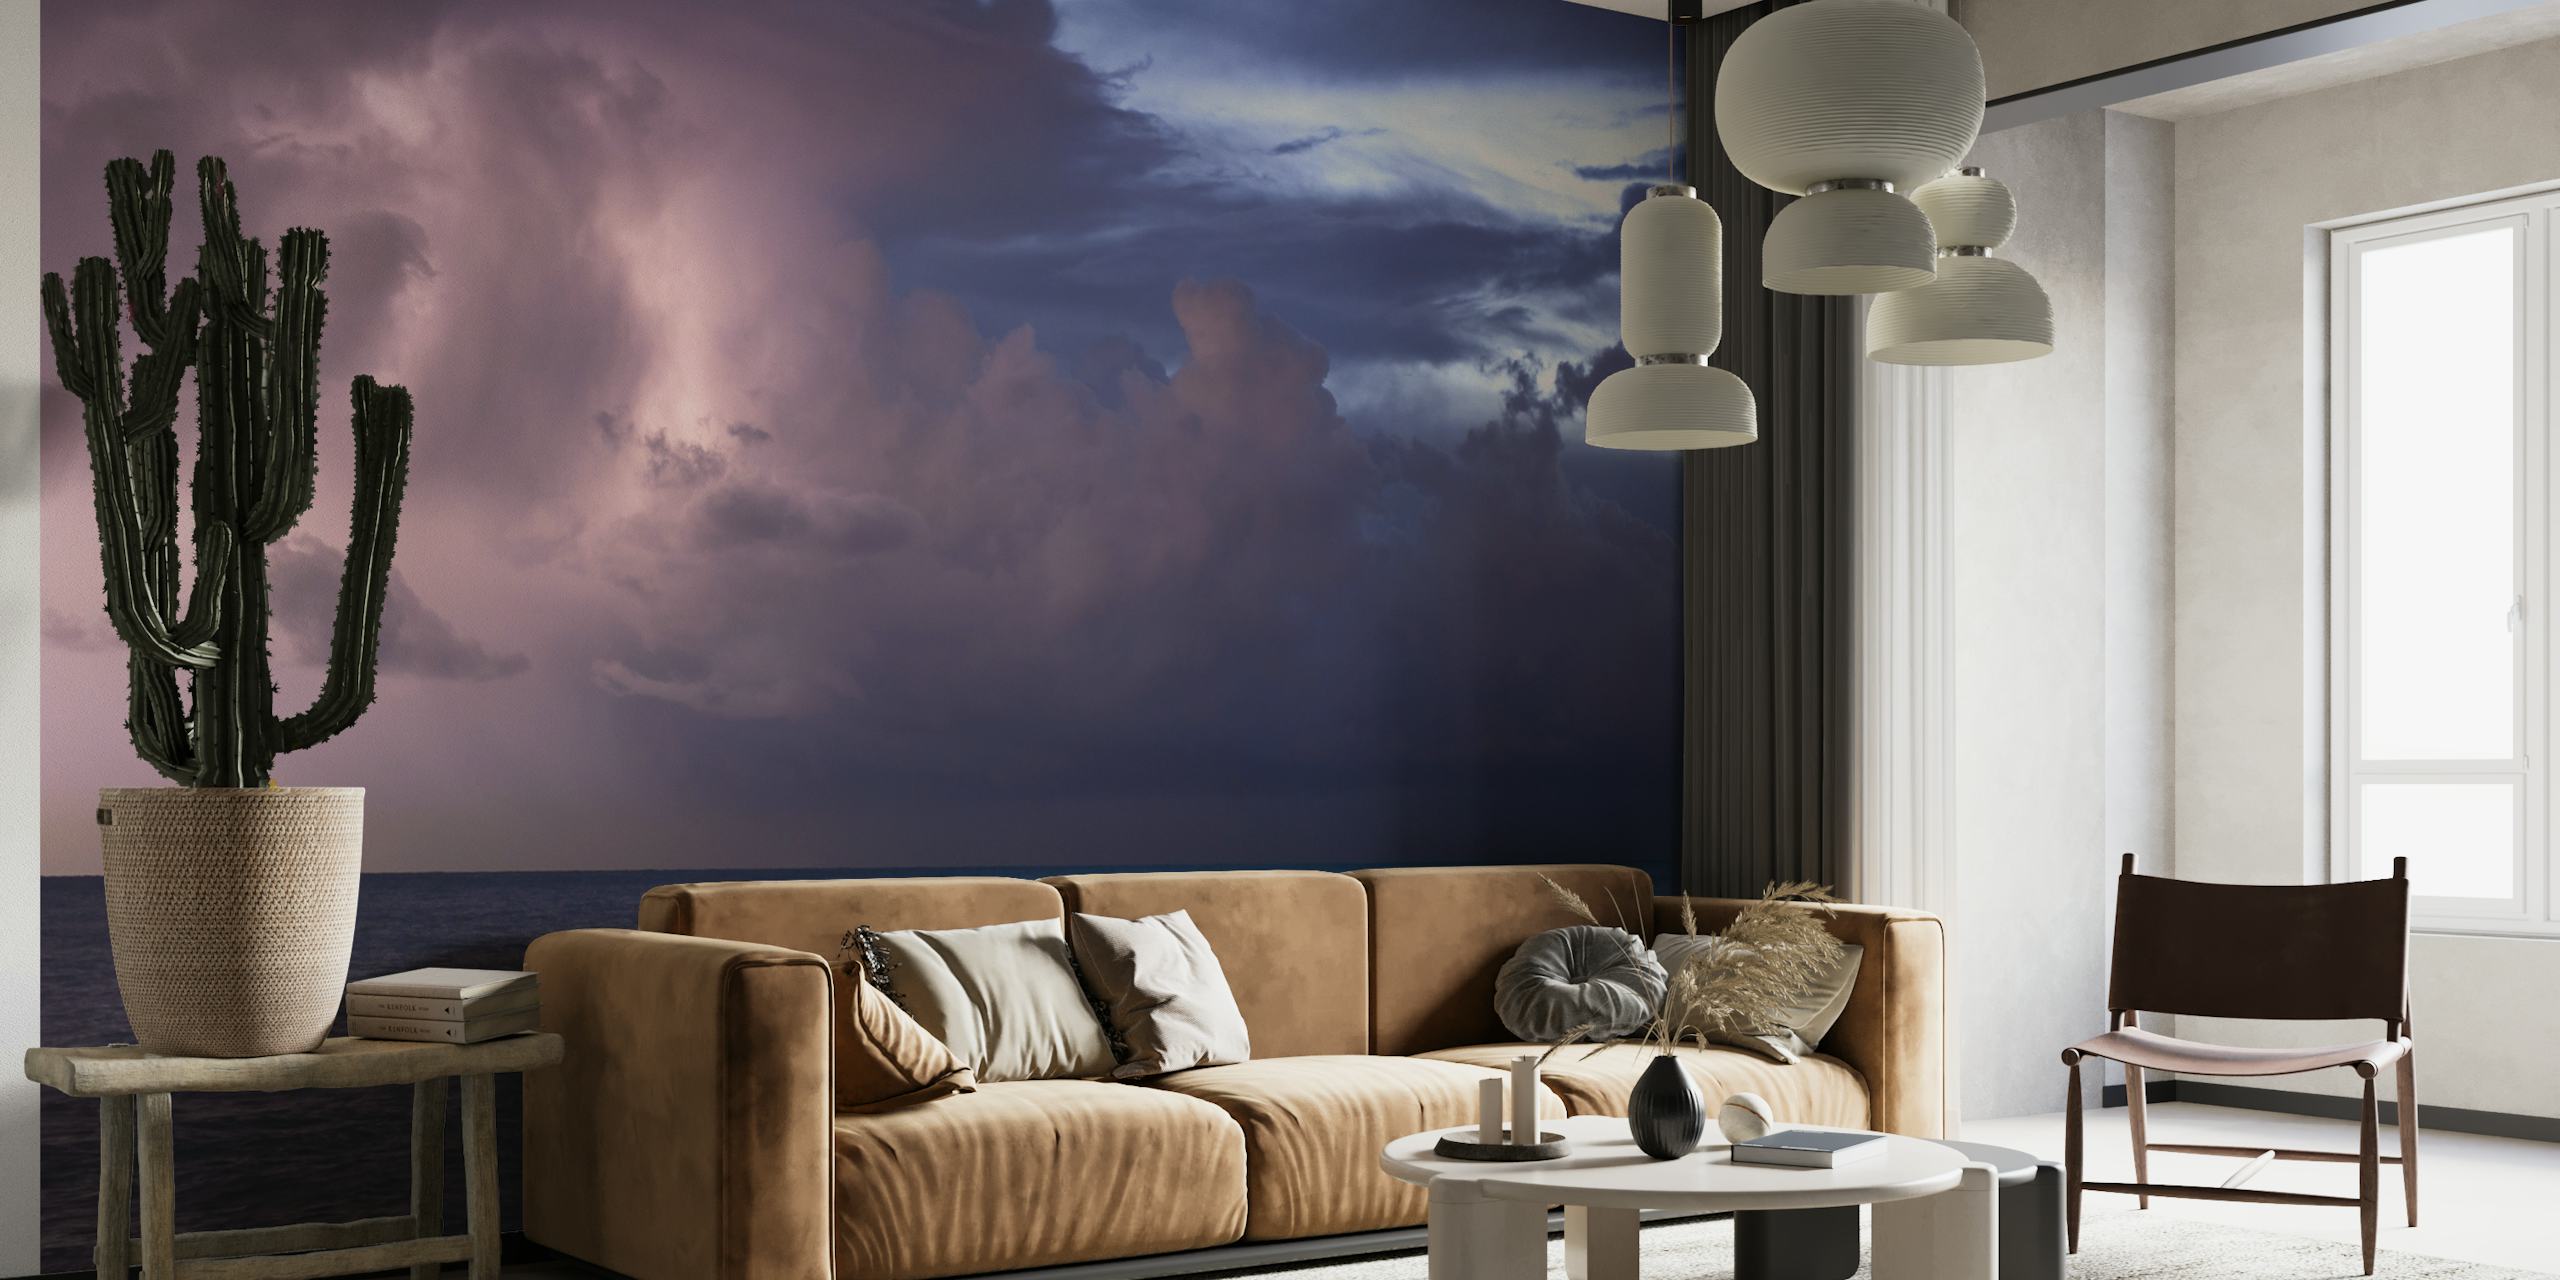 Seaside at dusk wall mural with dramatic clouds and calm ocean